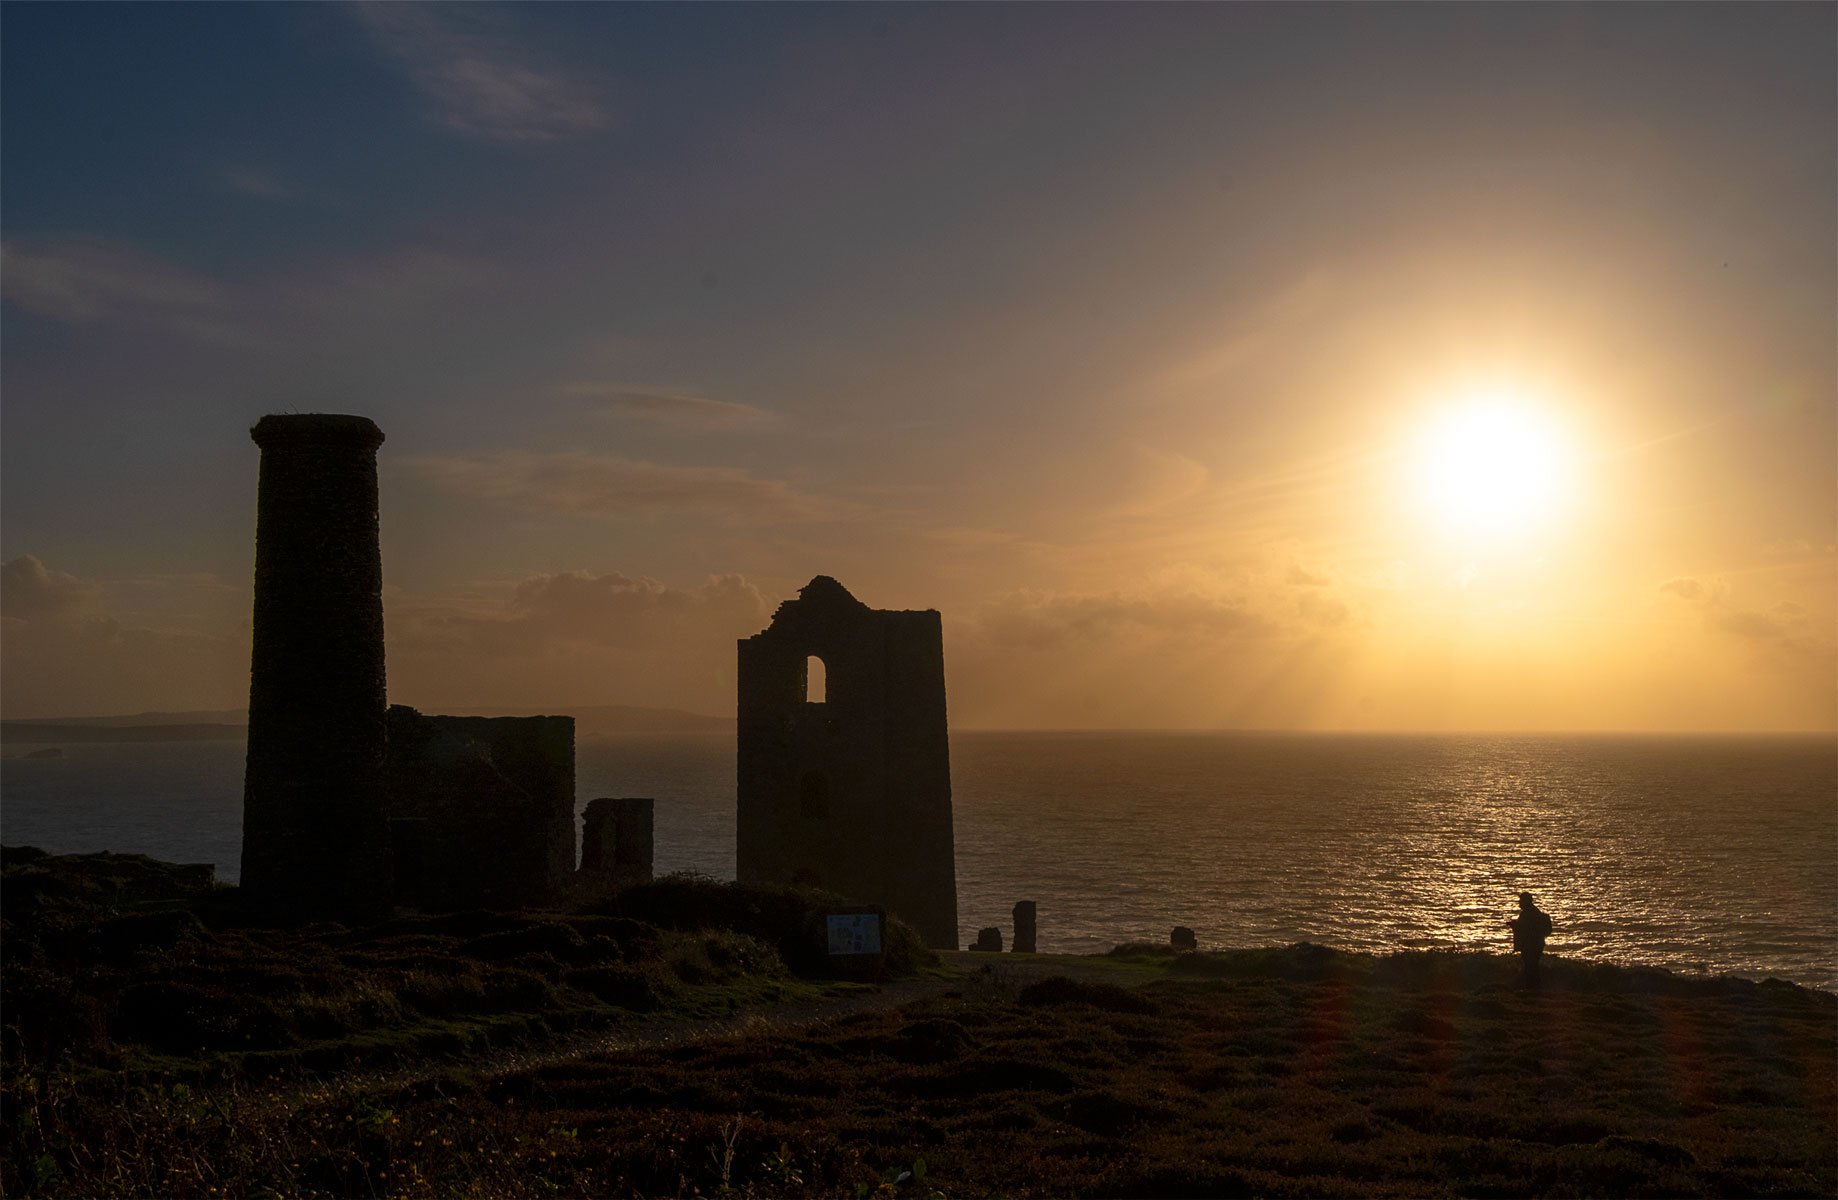 Sunset at Wheal Coates Mine by Suzanne Mellor